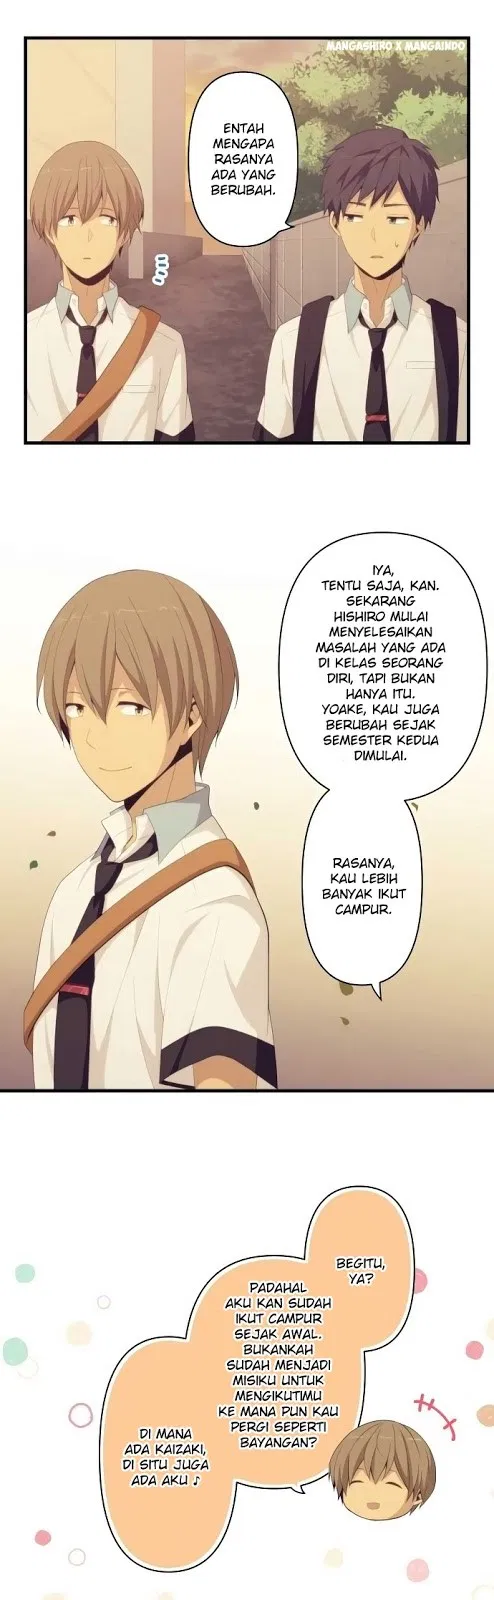 ReLIFE Chapter 140